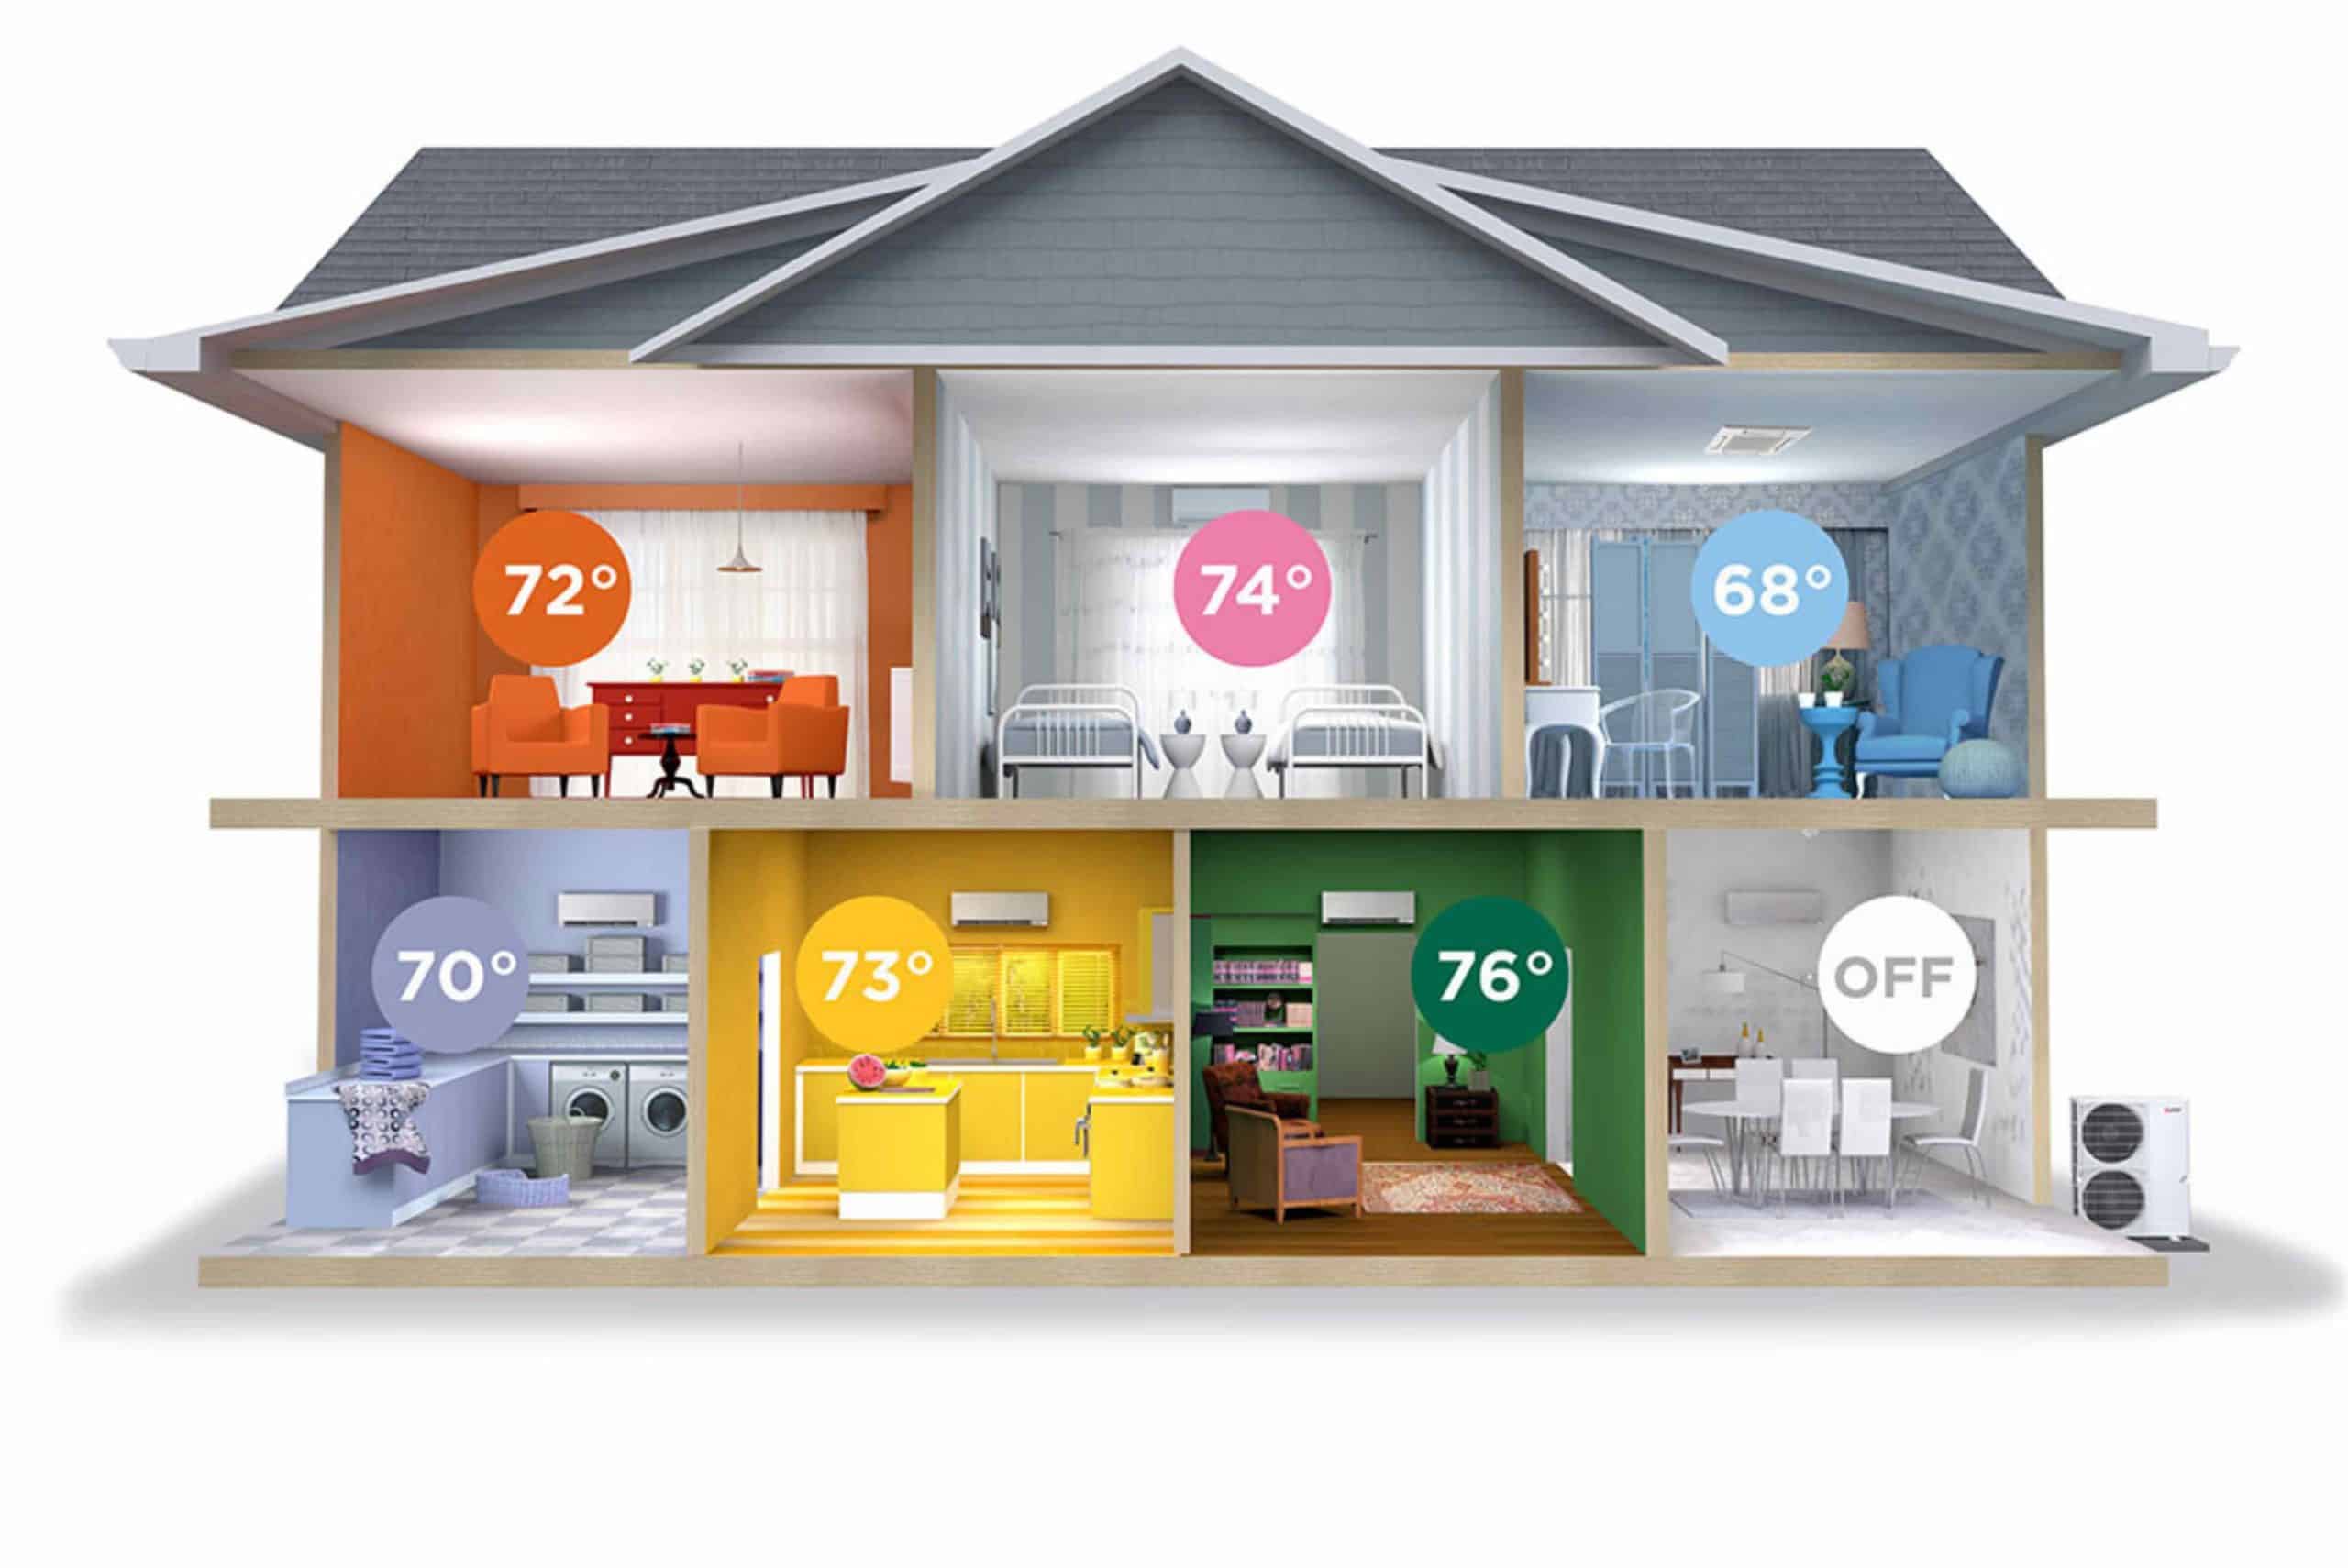 hvac zoned climate control by heat pumps and mini-splits